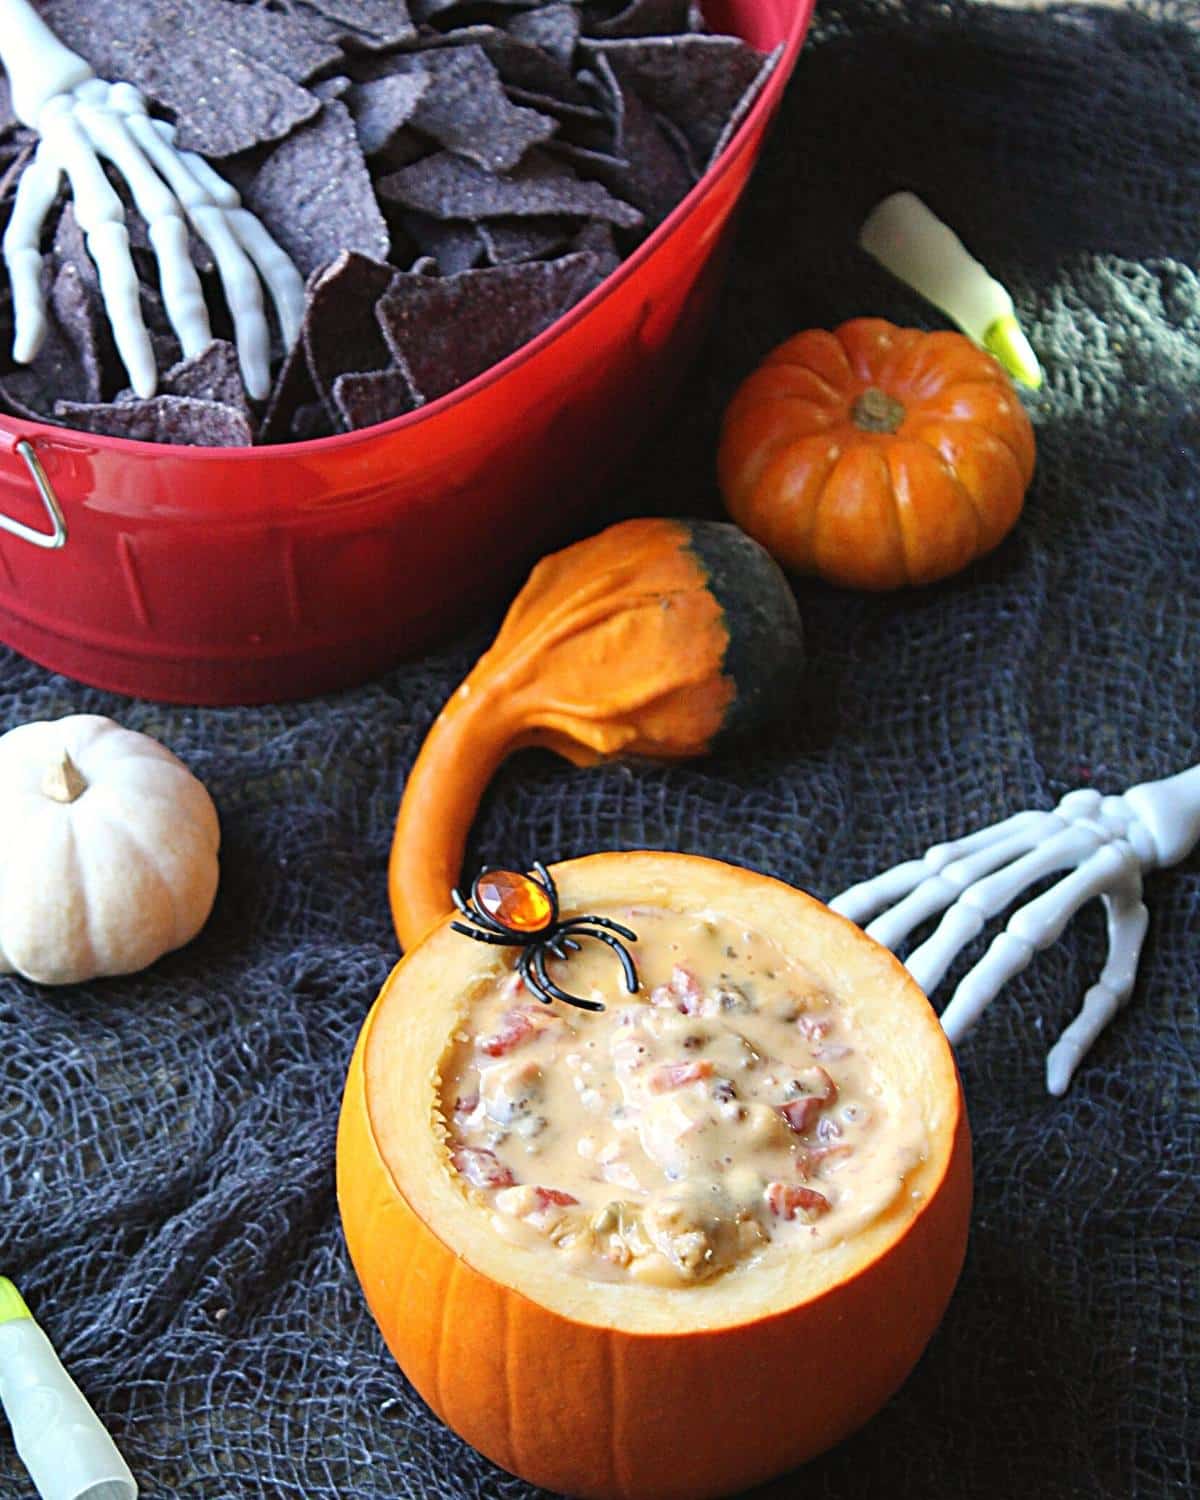 Sausage dip being served inside a hollowed out pumpkin. There is black netting and skeleton hands and mini pumpkins to set a Halloween theme.